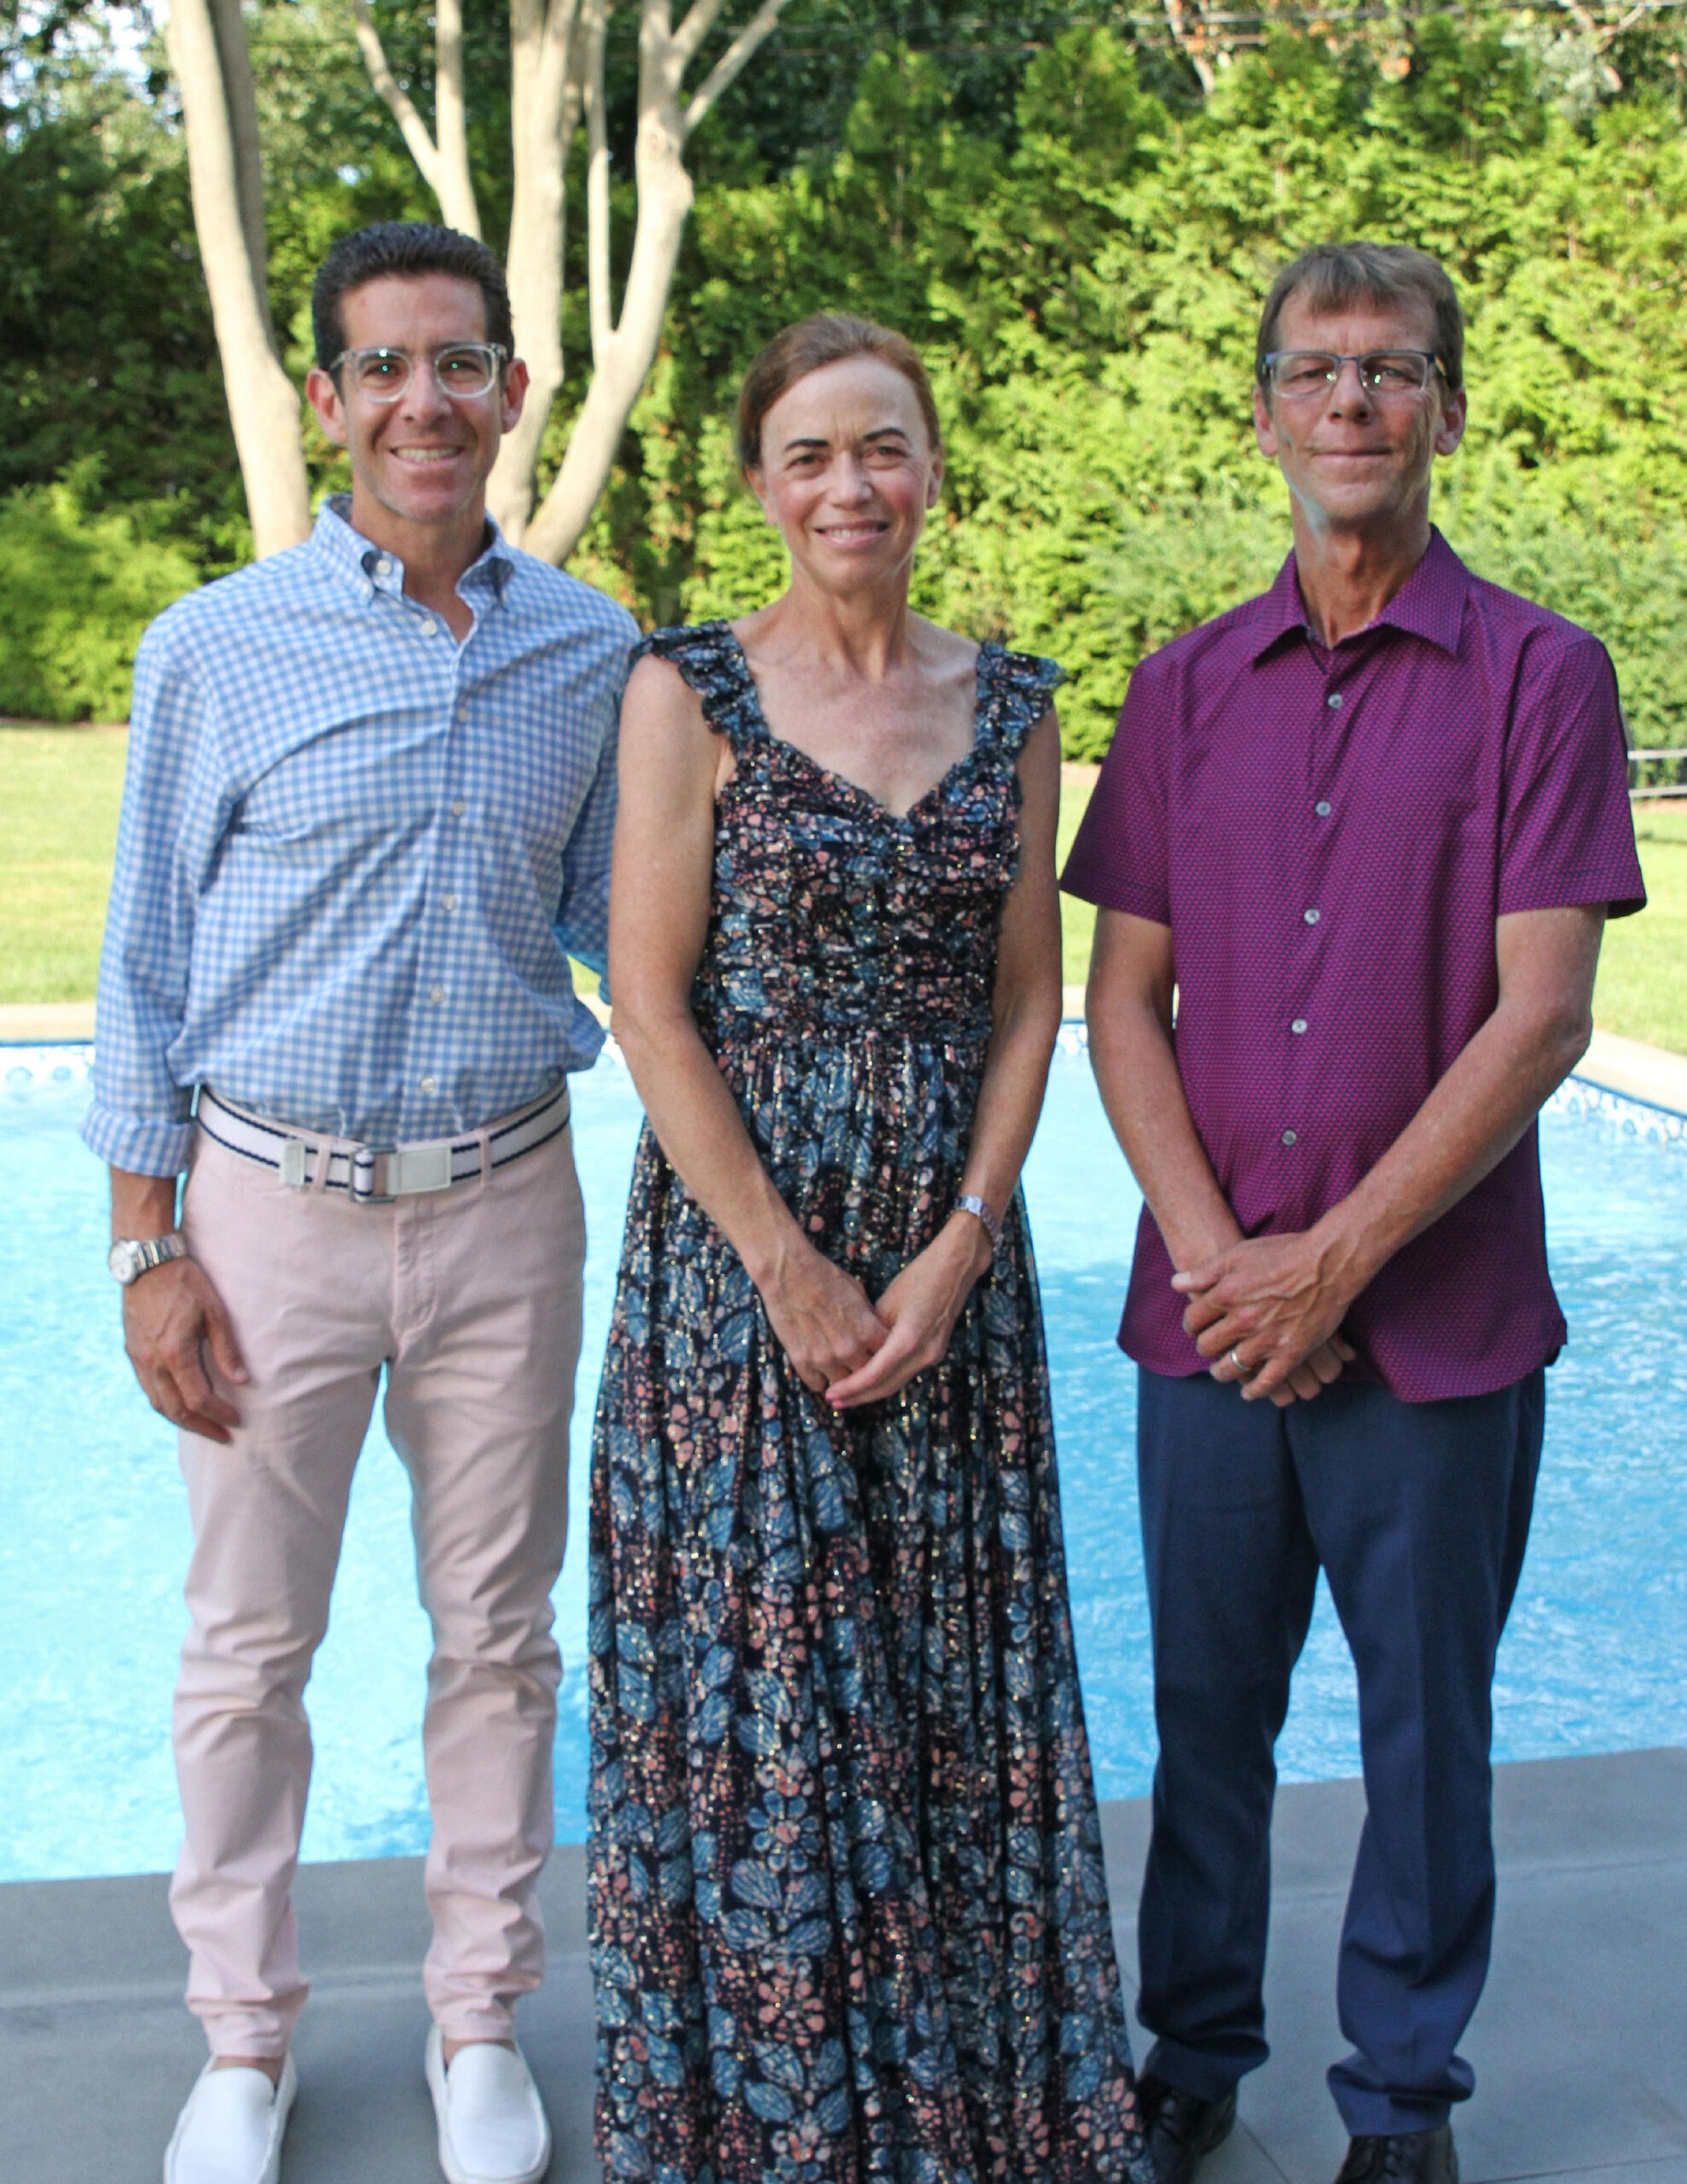 Hosts Lee Sossen and Sherri Williams, also a member of Maureen's Haven board of directors, and Maureen's Haven Executive Director Daniel O'Shea at a recent fundraiser for the organization held in Quogue. COURTESY MAUREEN'S HAVEN